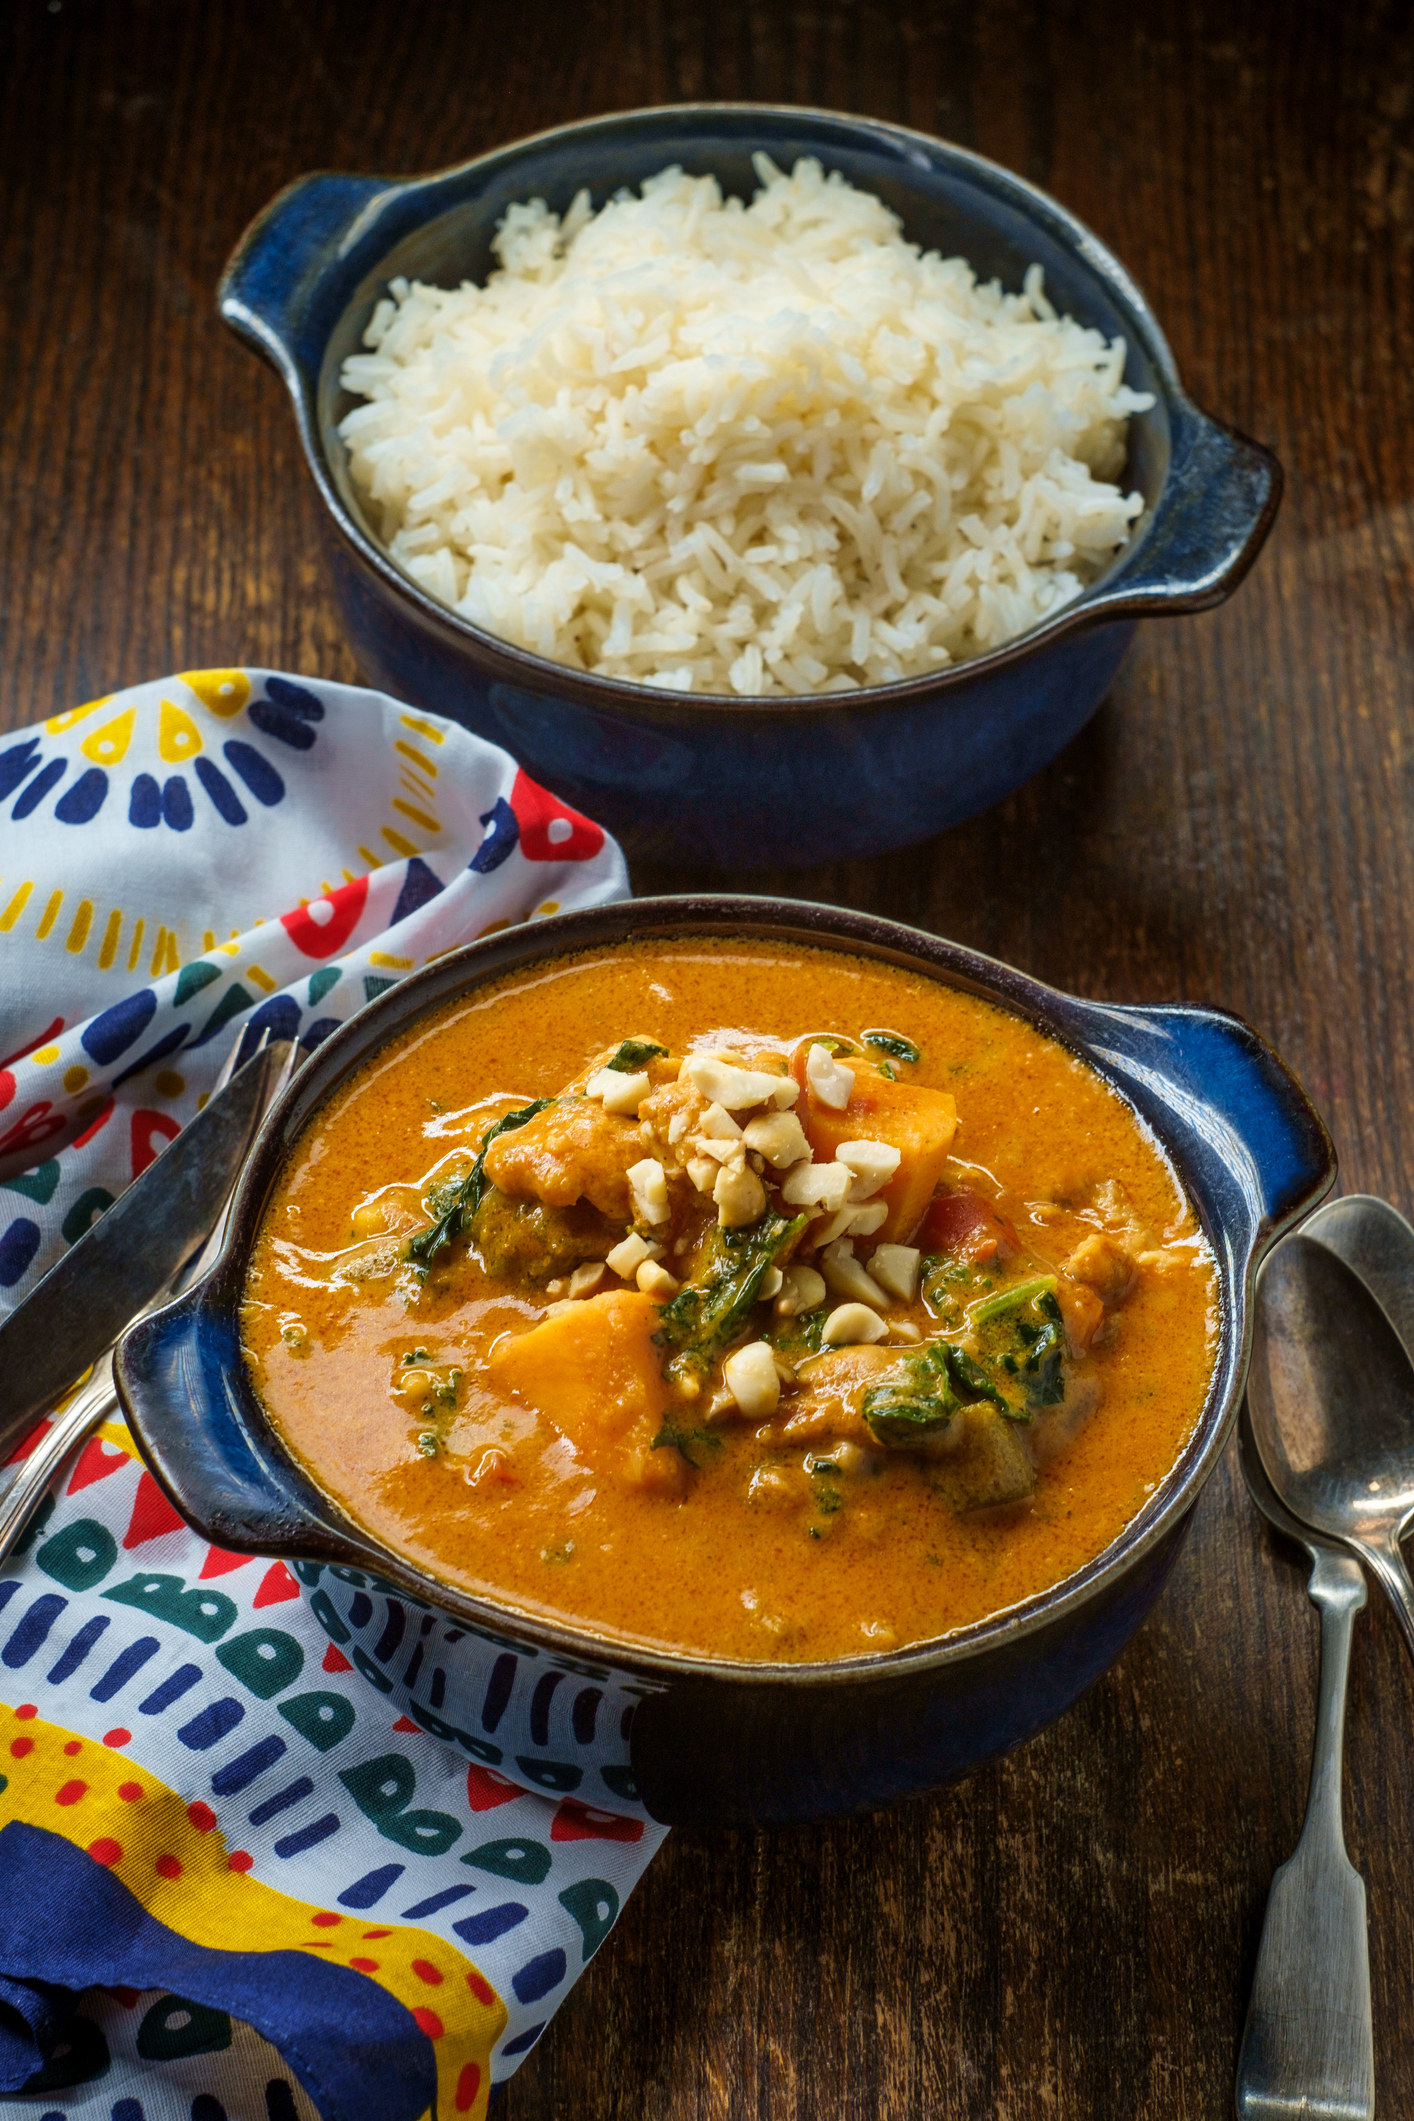 Peanut curry and rice